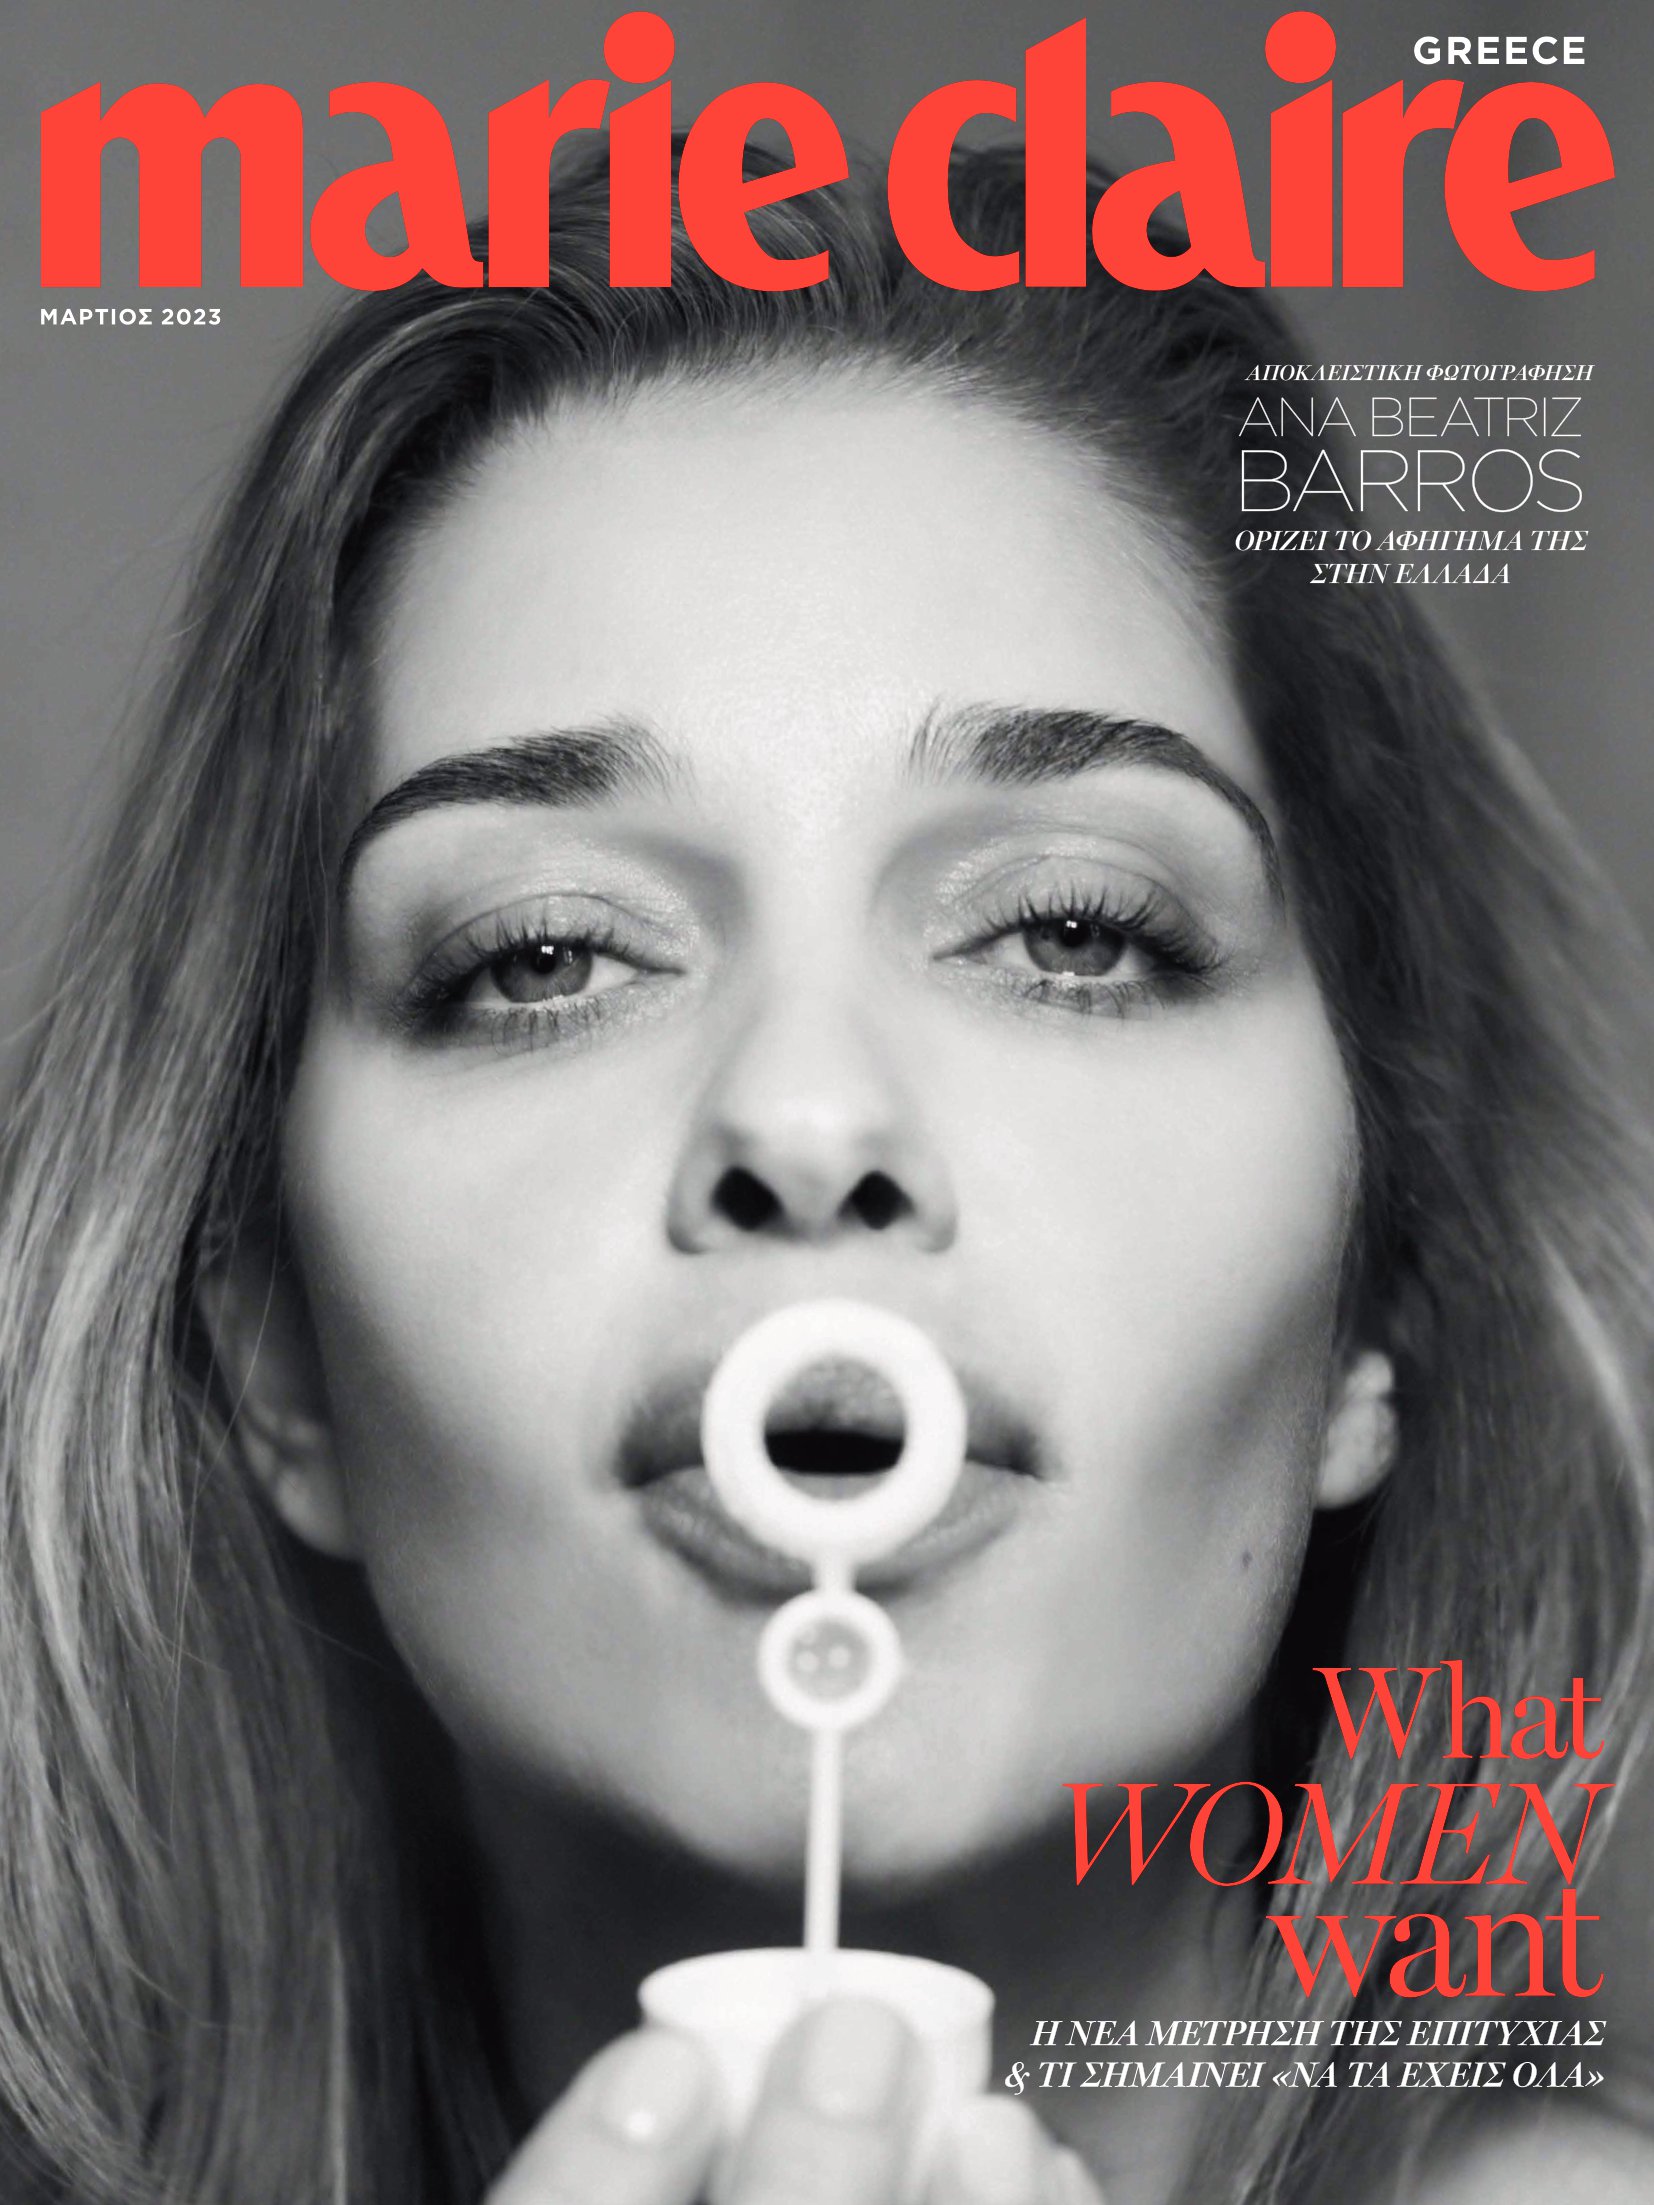 Ana Barros on the cover of Marie Claire